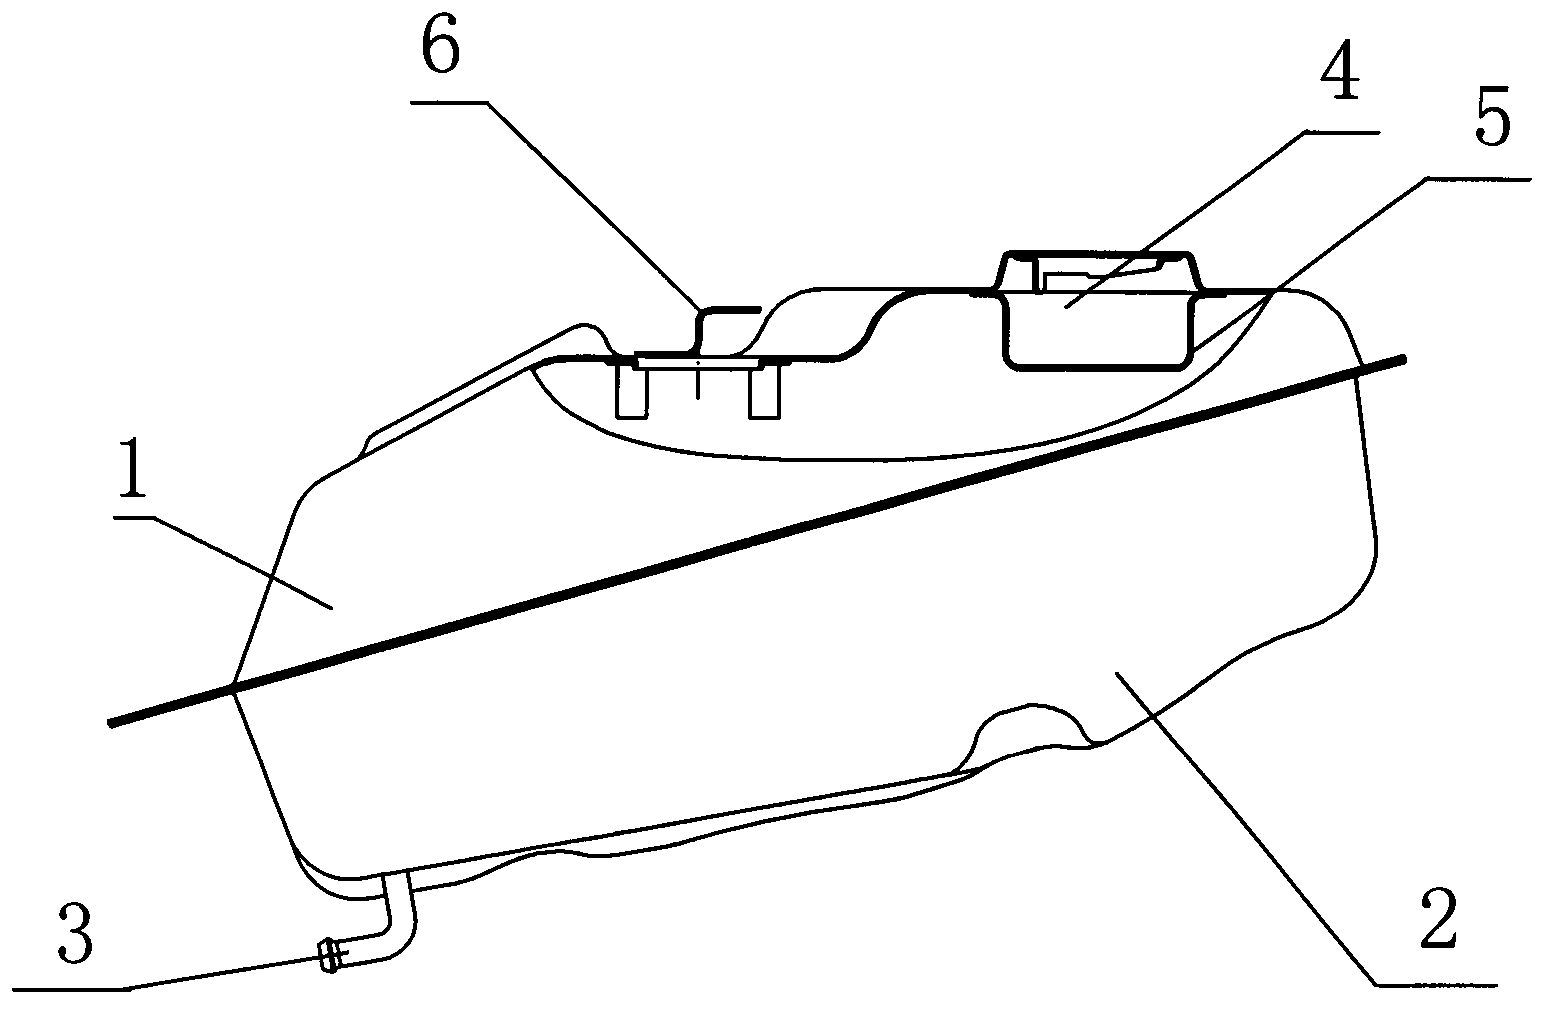 Fuel tank structure of motorcycle